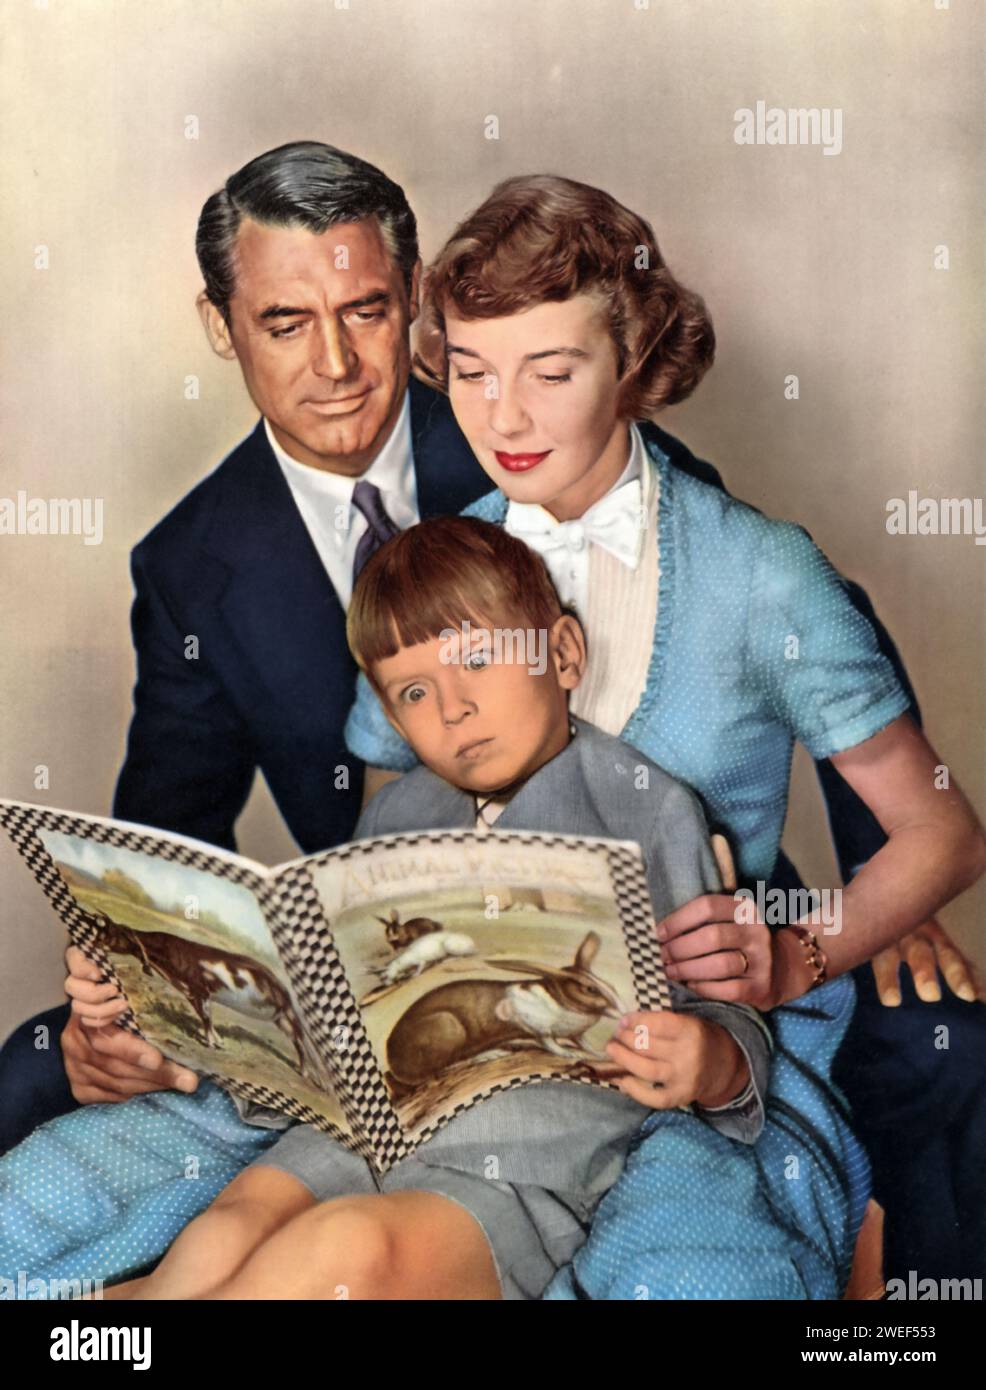 A portrait of Cary Grant, Betsy Drake, and George Winslow, starring in 'Room for One More' (1952). In this heartwarming family comedy, Grant and Drake, a real-life couple at the time, play George and Anna Rose, a pair who open their home and hearts to a series of foster children, including a character played by young George Winslow. The film showcases the challenges and joys of a growing family, with Grant and Drake's natural chemistry enhancing the film's charm and warmth. Stock Photo